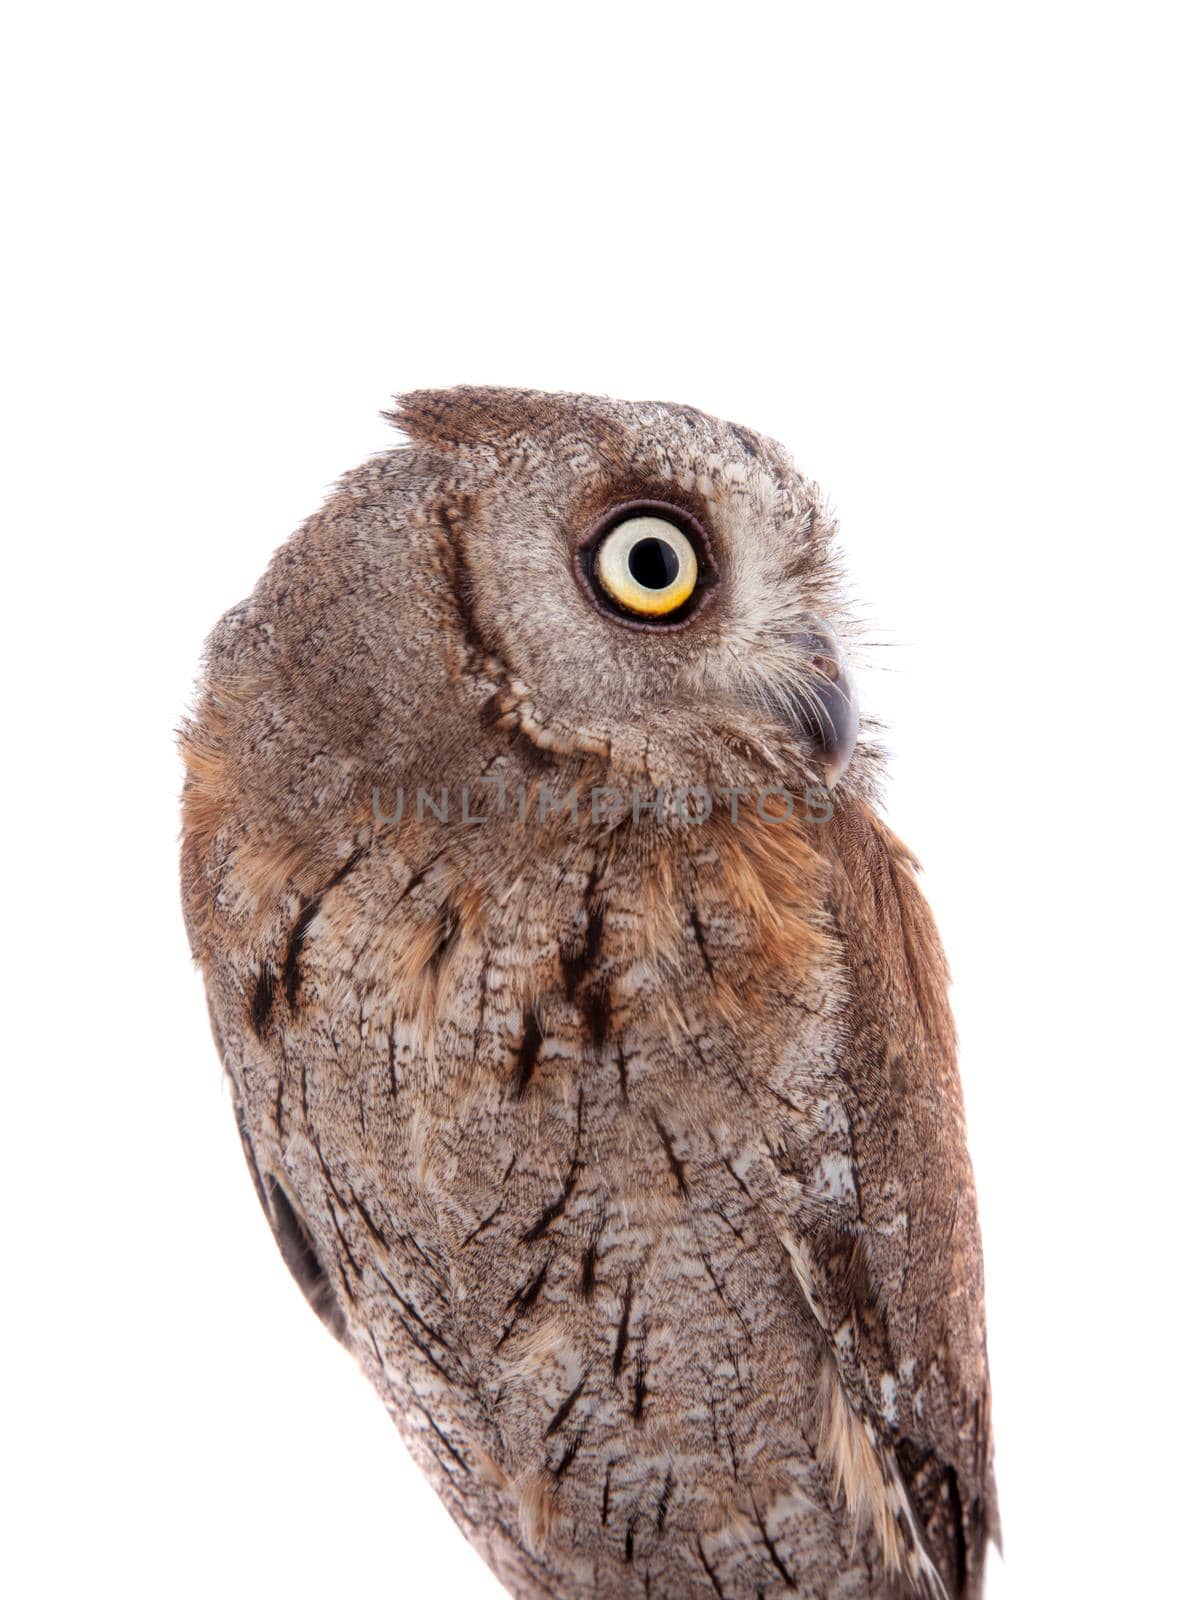 The European scops owl on white by RosaJay